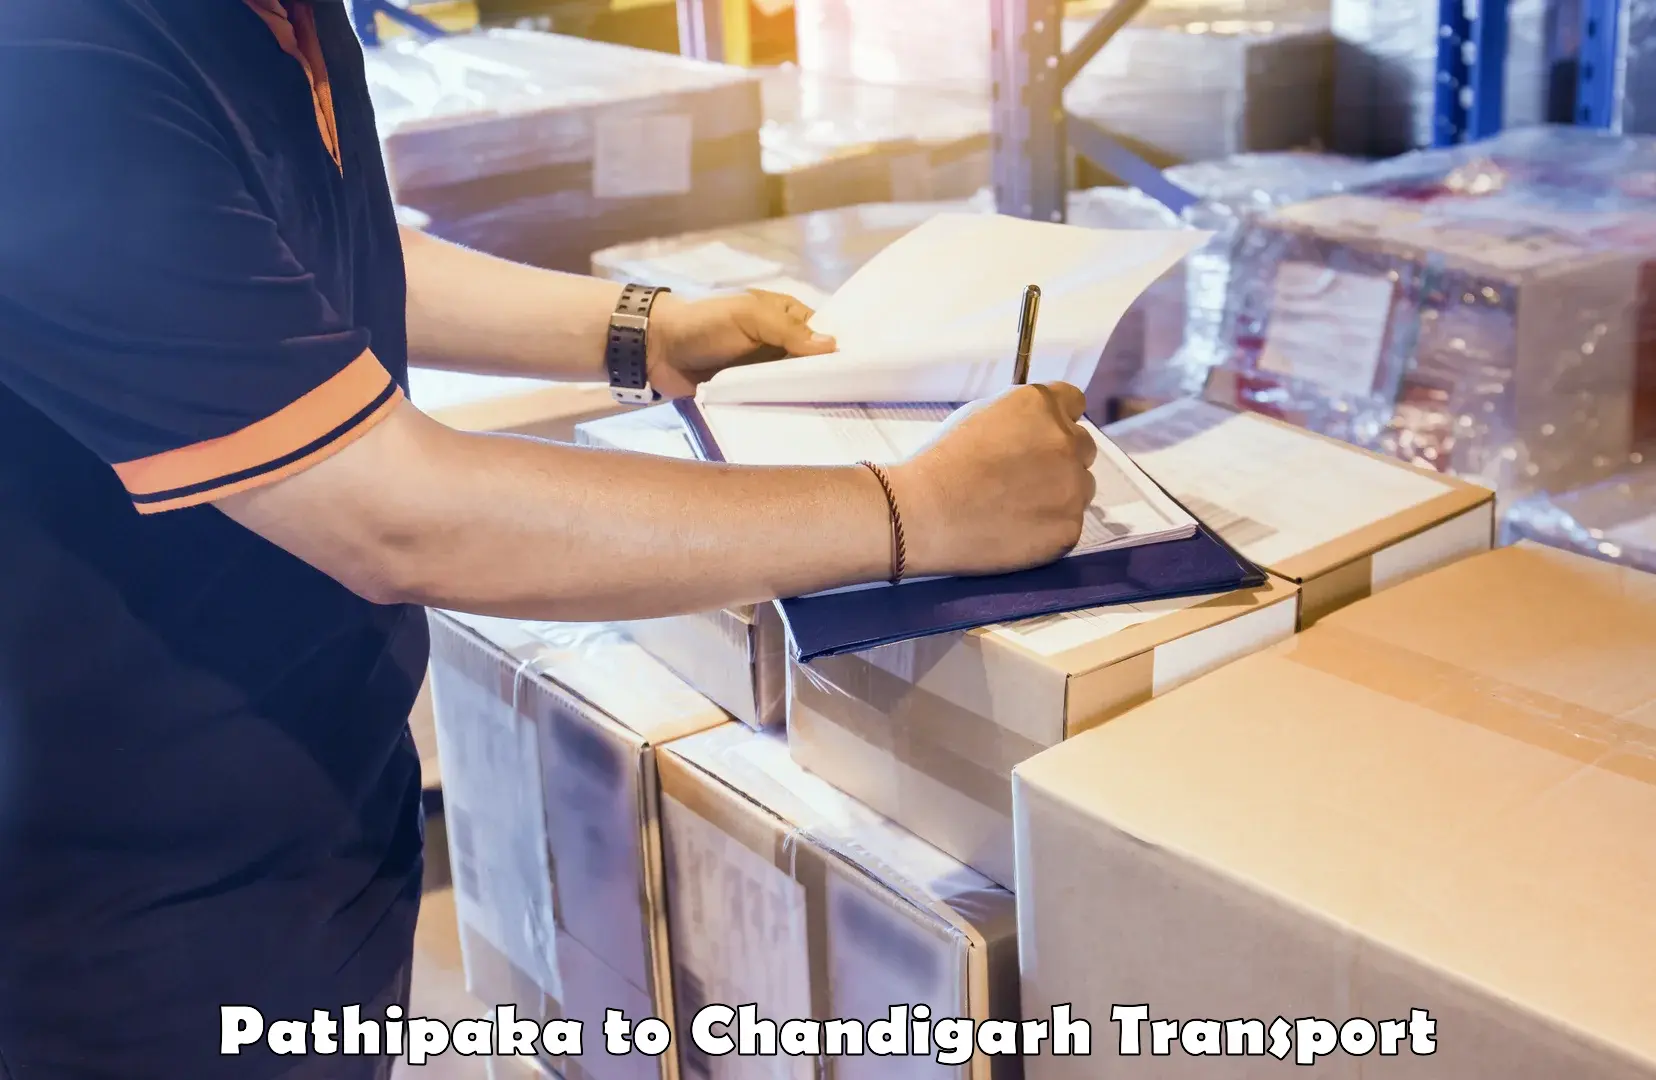 Delivery service Pathipaka to Chandigarh